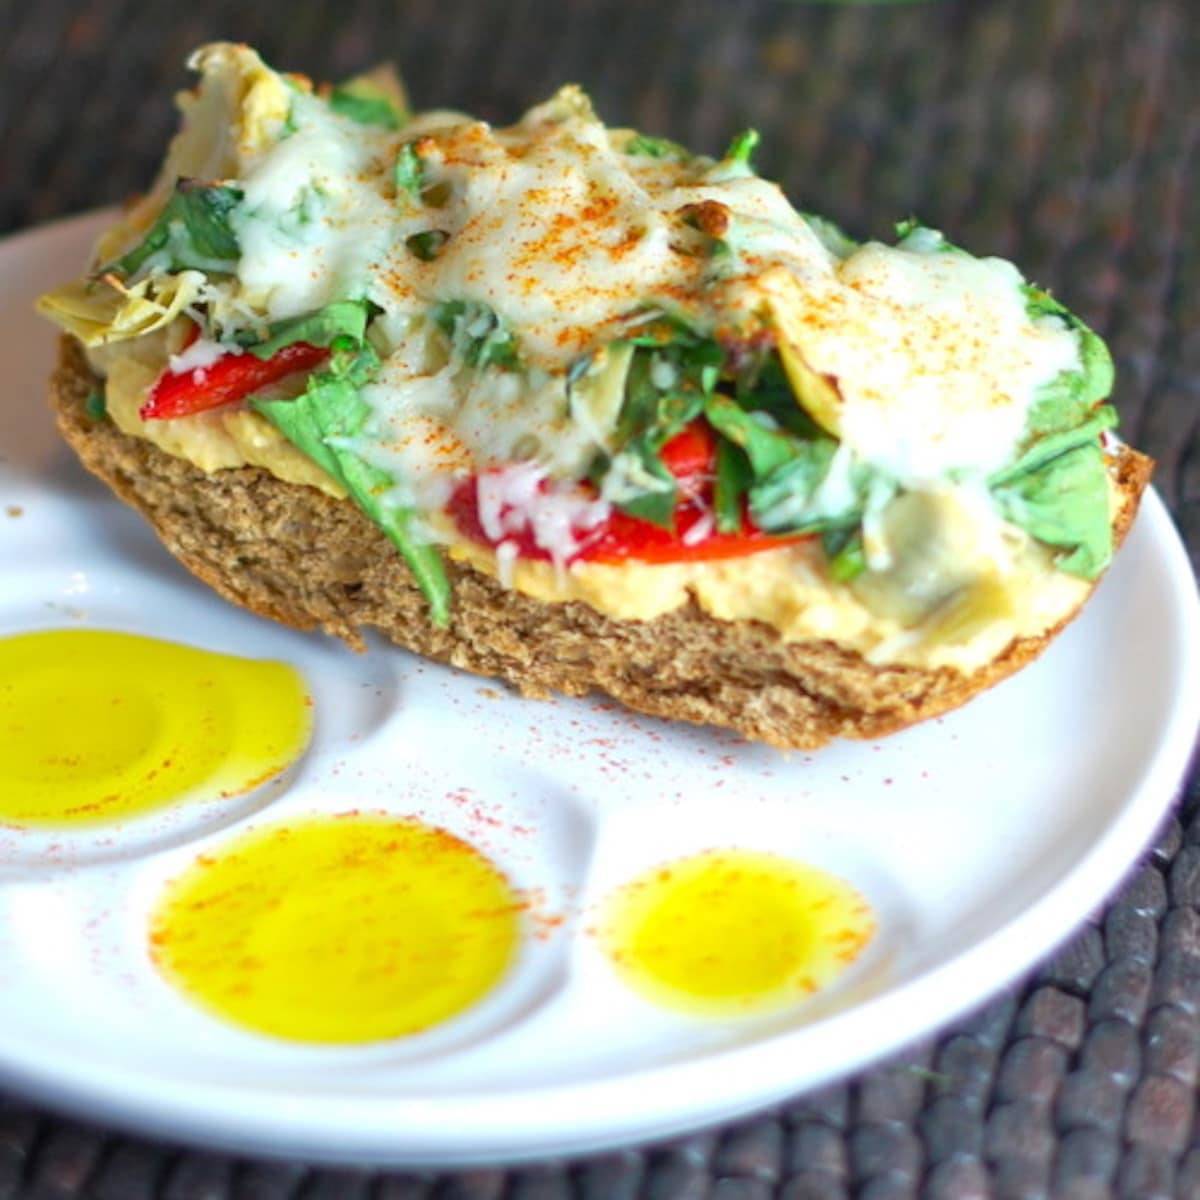 Open-faced sandwich with artichokes and red peppers over hummus and bread, drizzled with olive oil.